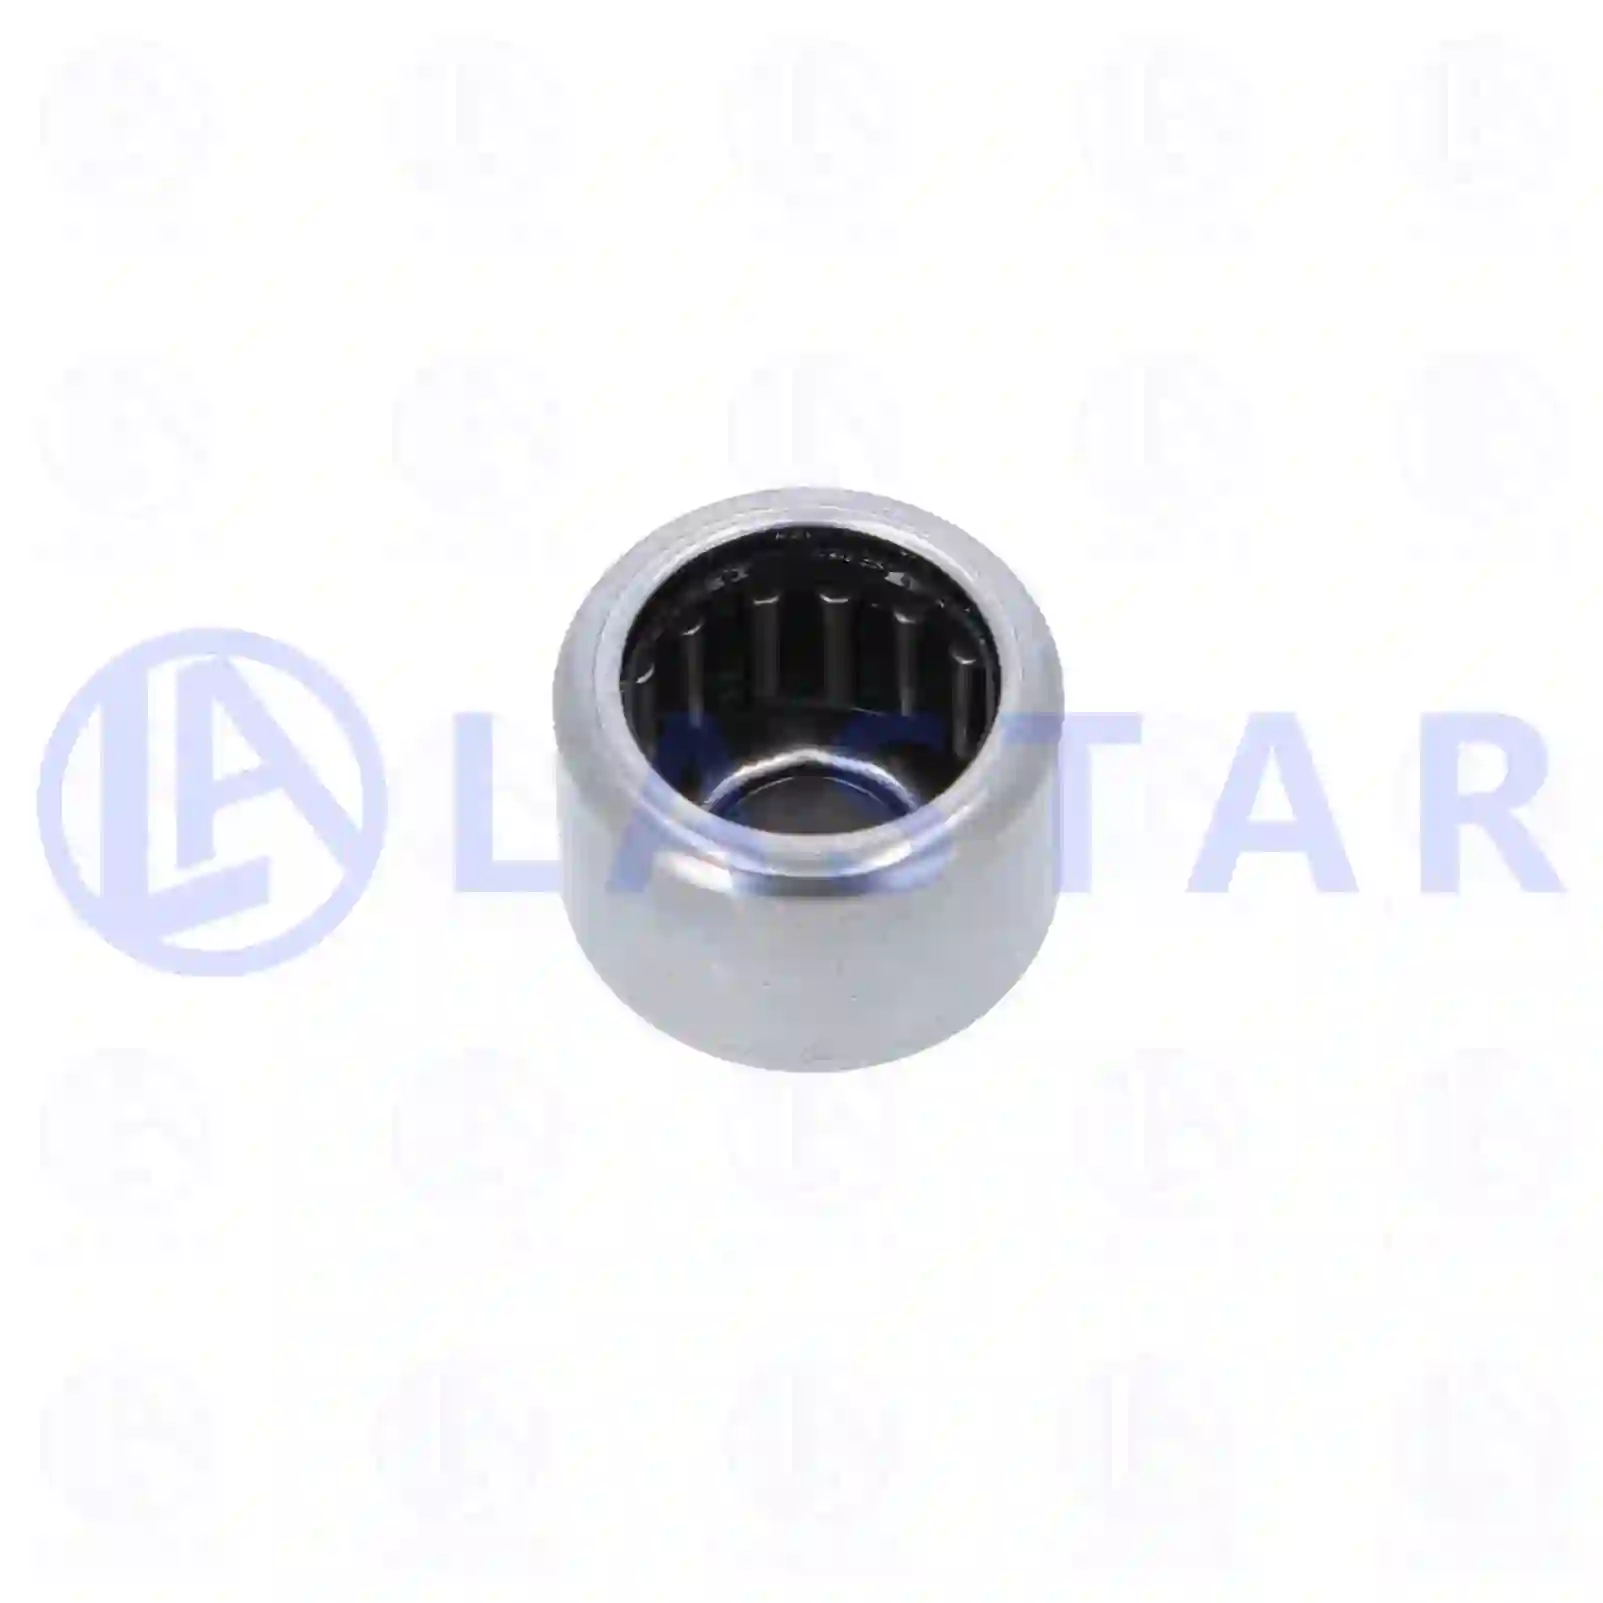 Needle bearing, 77732101, 7400183368, 283319, 183368, ZG02563-0008 ||  77732101 Lastar Spare Part | Truck Spare Parts, Auotomotive Spare Parts Needle bearing, 77732101, 7400183368, 283319, 183368, ZG02563-0008 ||  77732101 Lastar Spare Part | Truck Spare Parts, Auotomotive Spare Parts